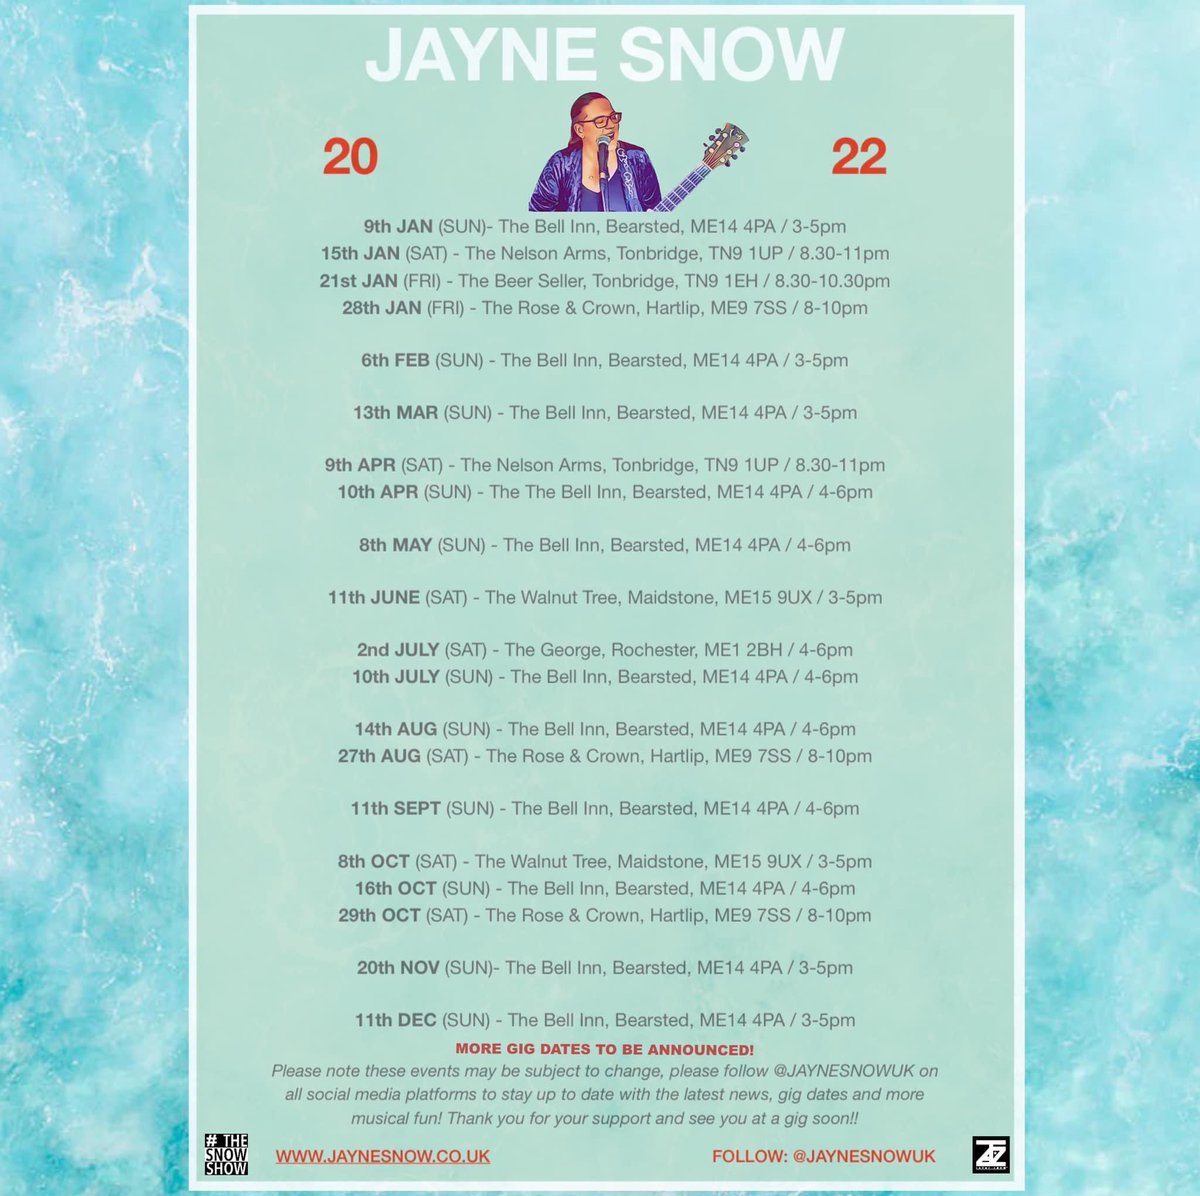 🐣 Early bird - Jayne Snow 2022 gig dates! Pop them in your diary! 🥳🙌🏻

More to be announced soon!

Have an amazing day! 😁🙌🏻 ☀️ 

#JayneSnow #GigDates #Gigs2022 #JayneSnowUk